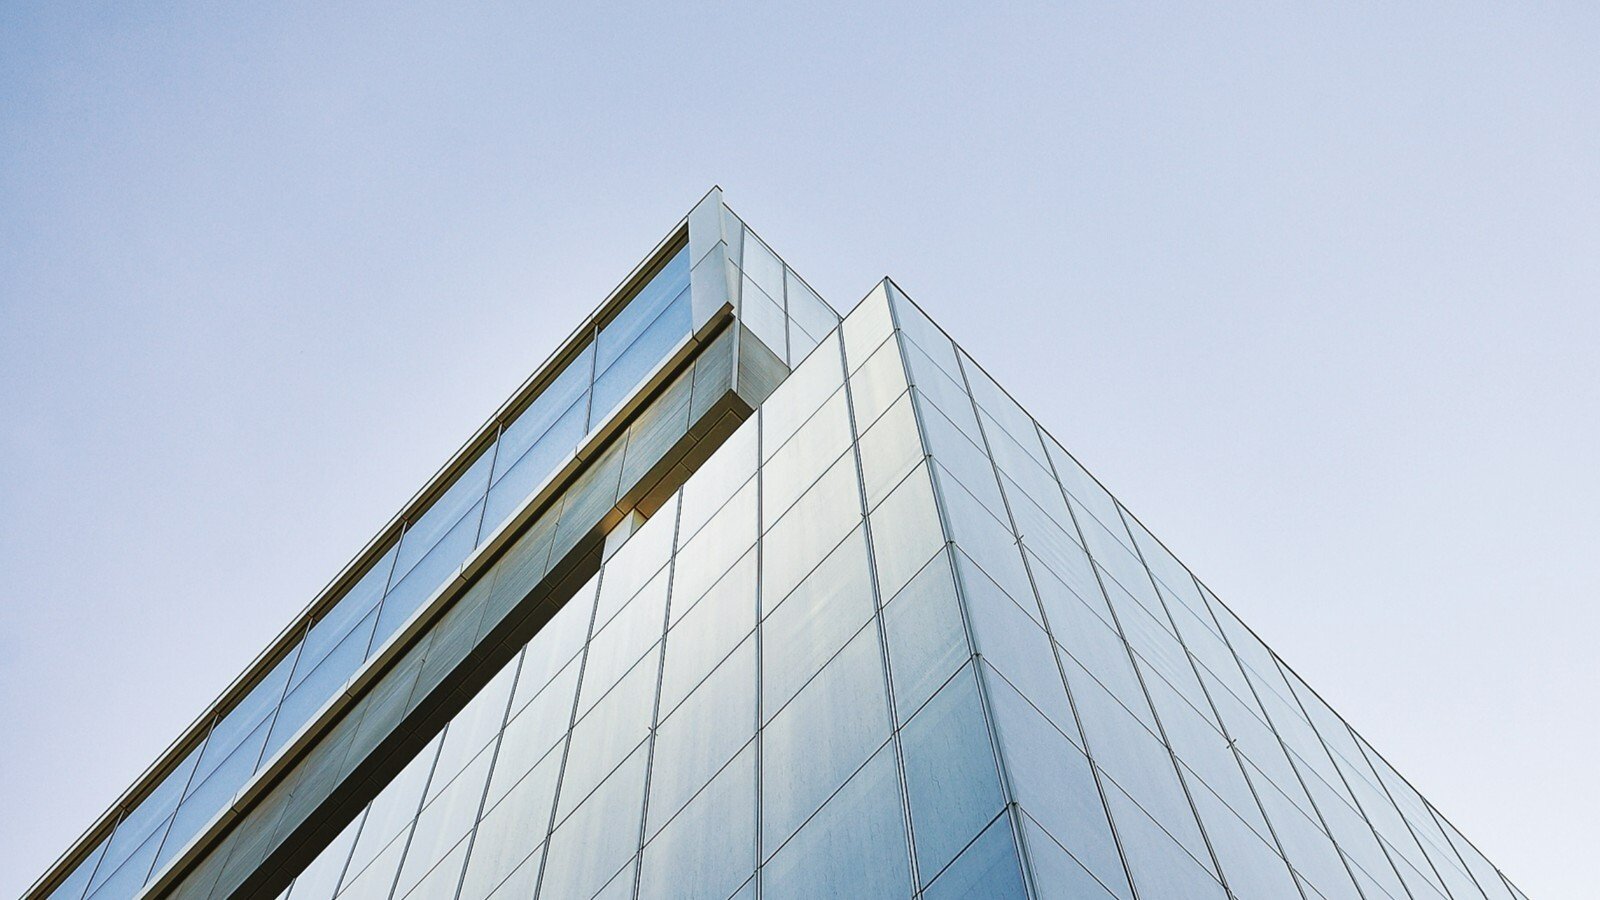 Close up of the top floors of  Rothschild & Co's New Court office in London